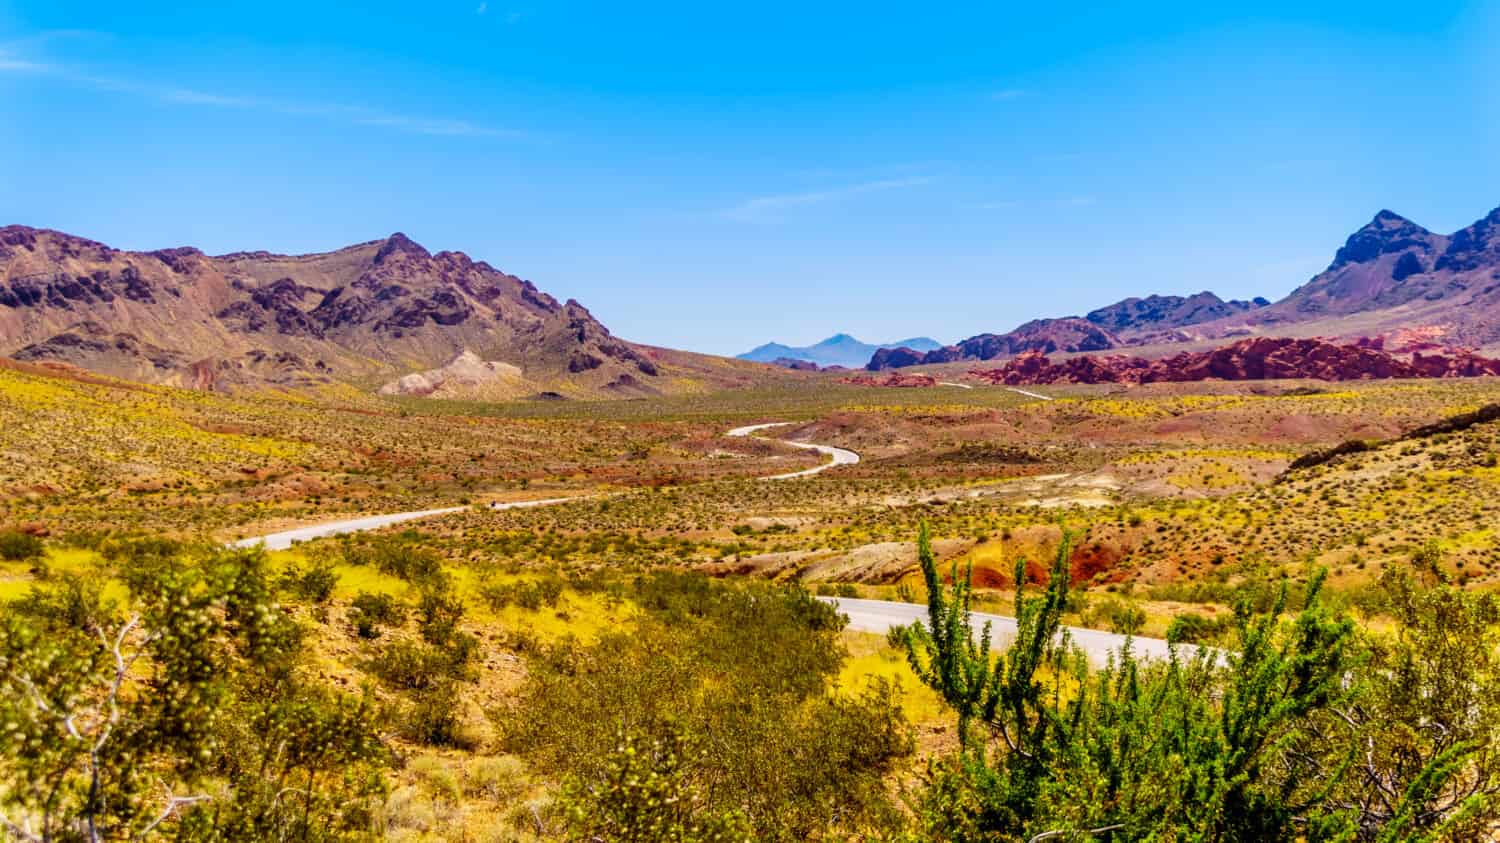 Northshore Road SR167 in Lake Mead National Recreation Area runs through semi desert landscape with colorful mountains between Boulder City and Overton in Nevada, USA